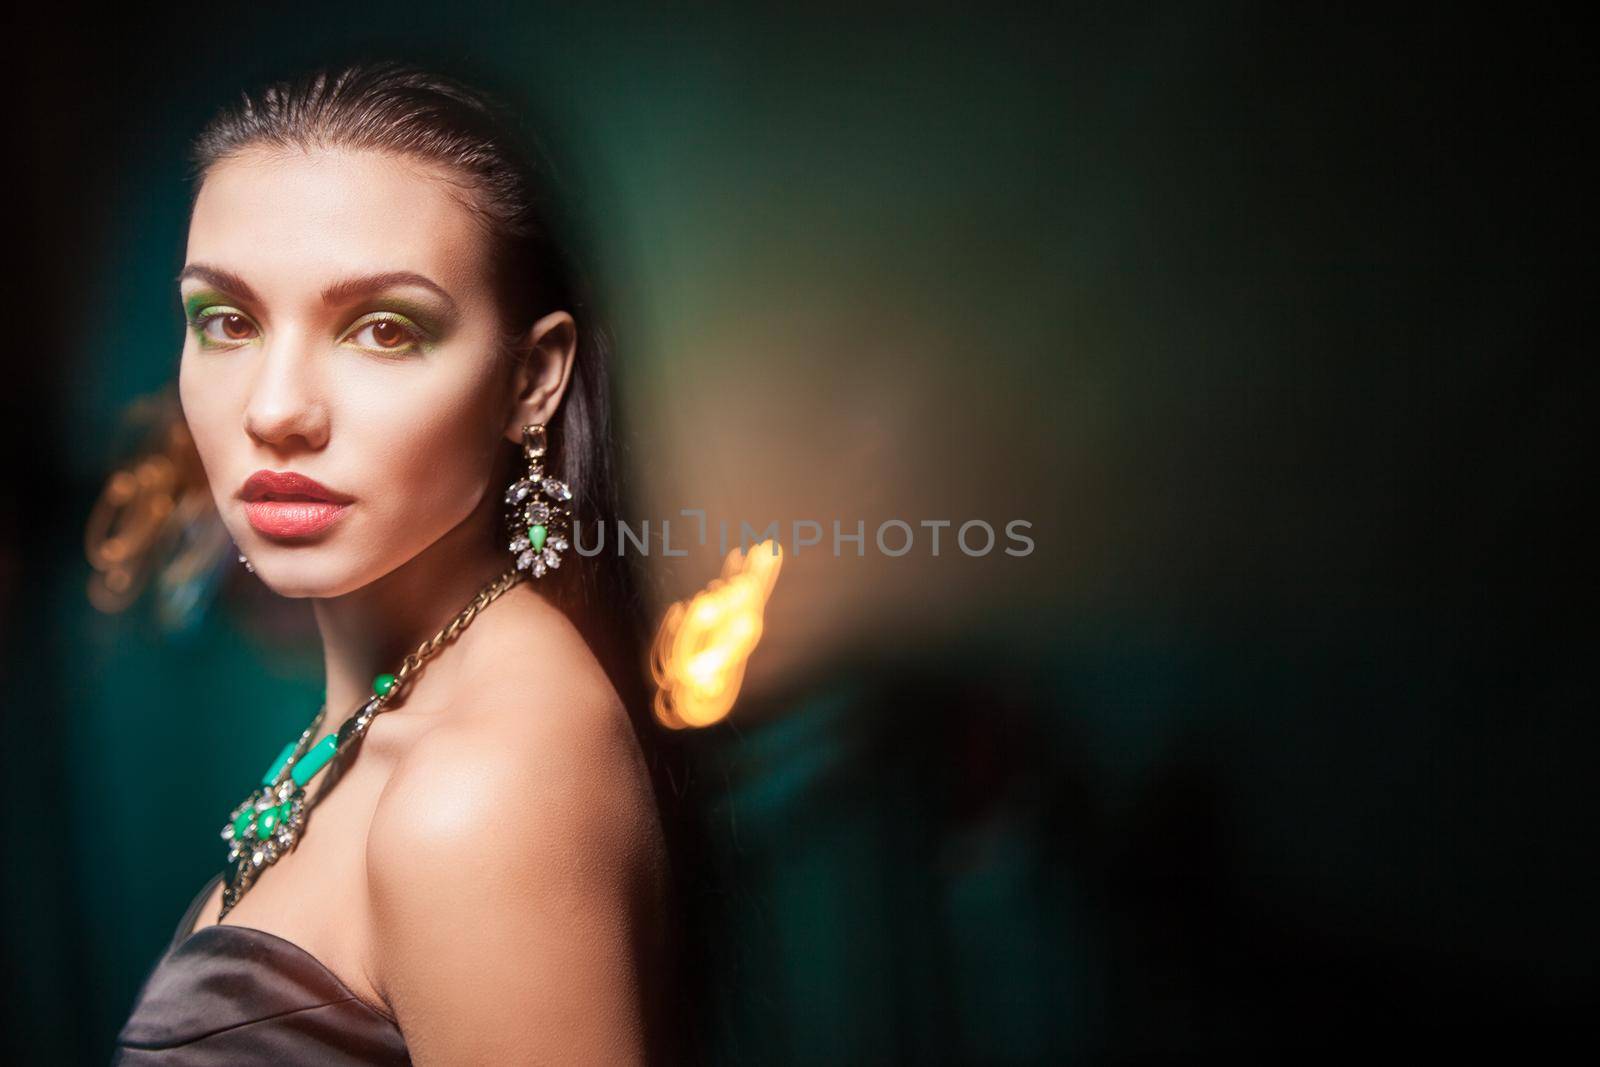 Beautiful woman with evening make-up over dark background. Jewelry and Beauty. Fashion photo